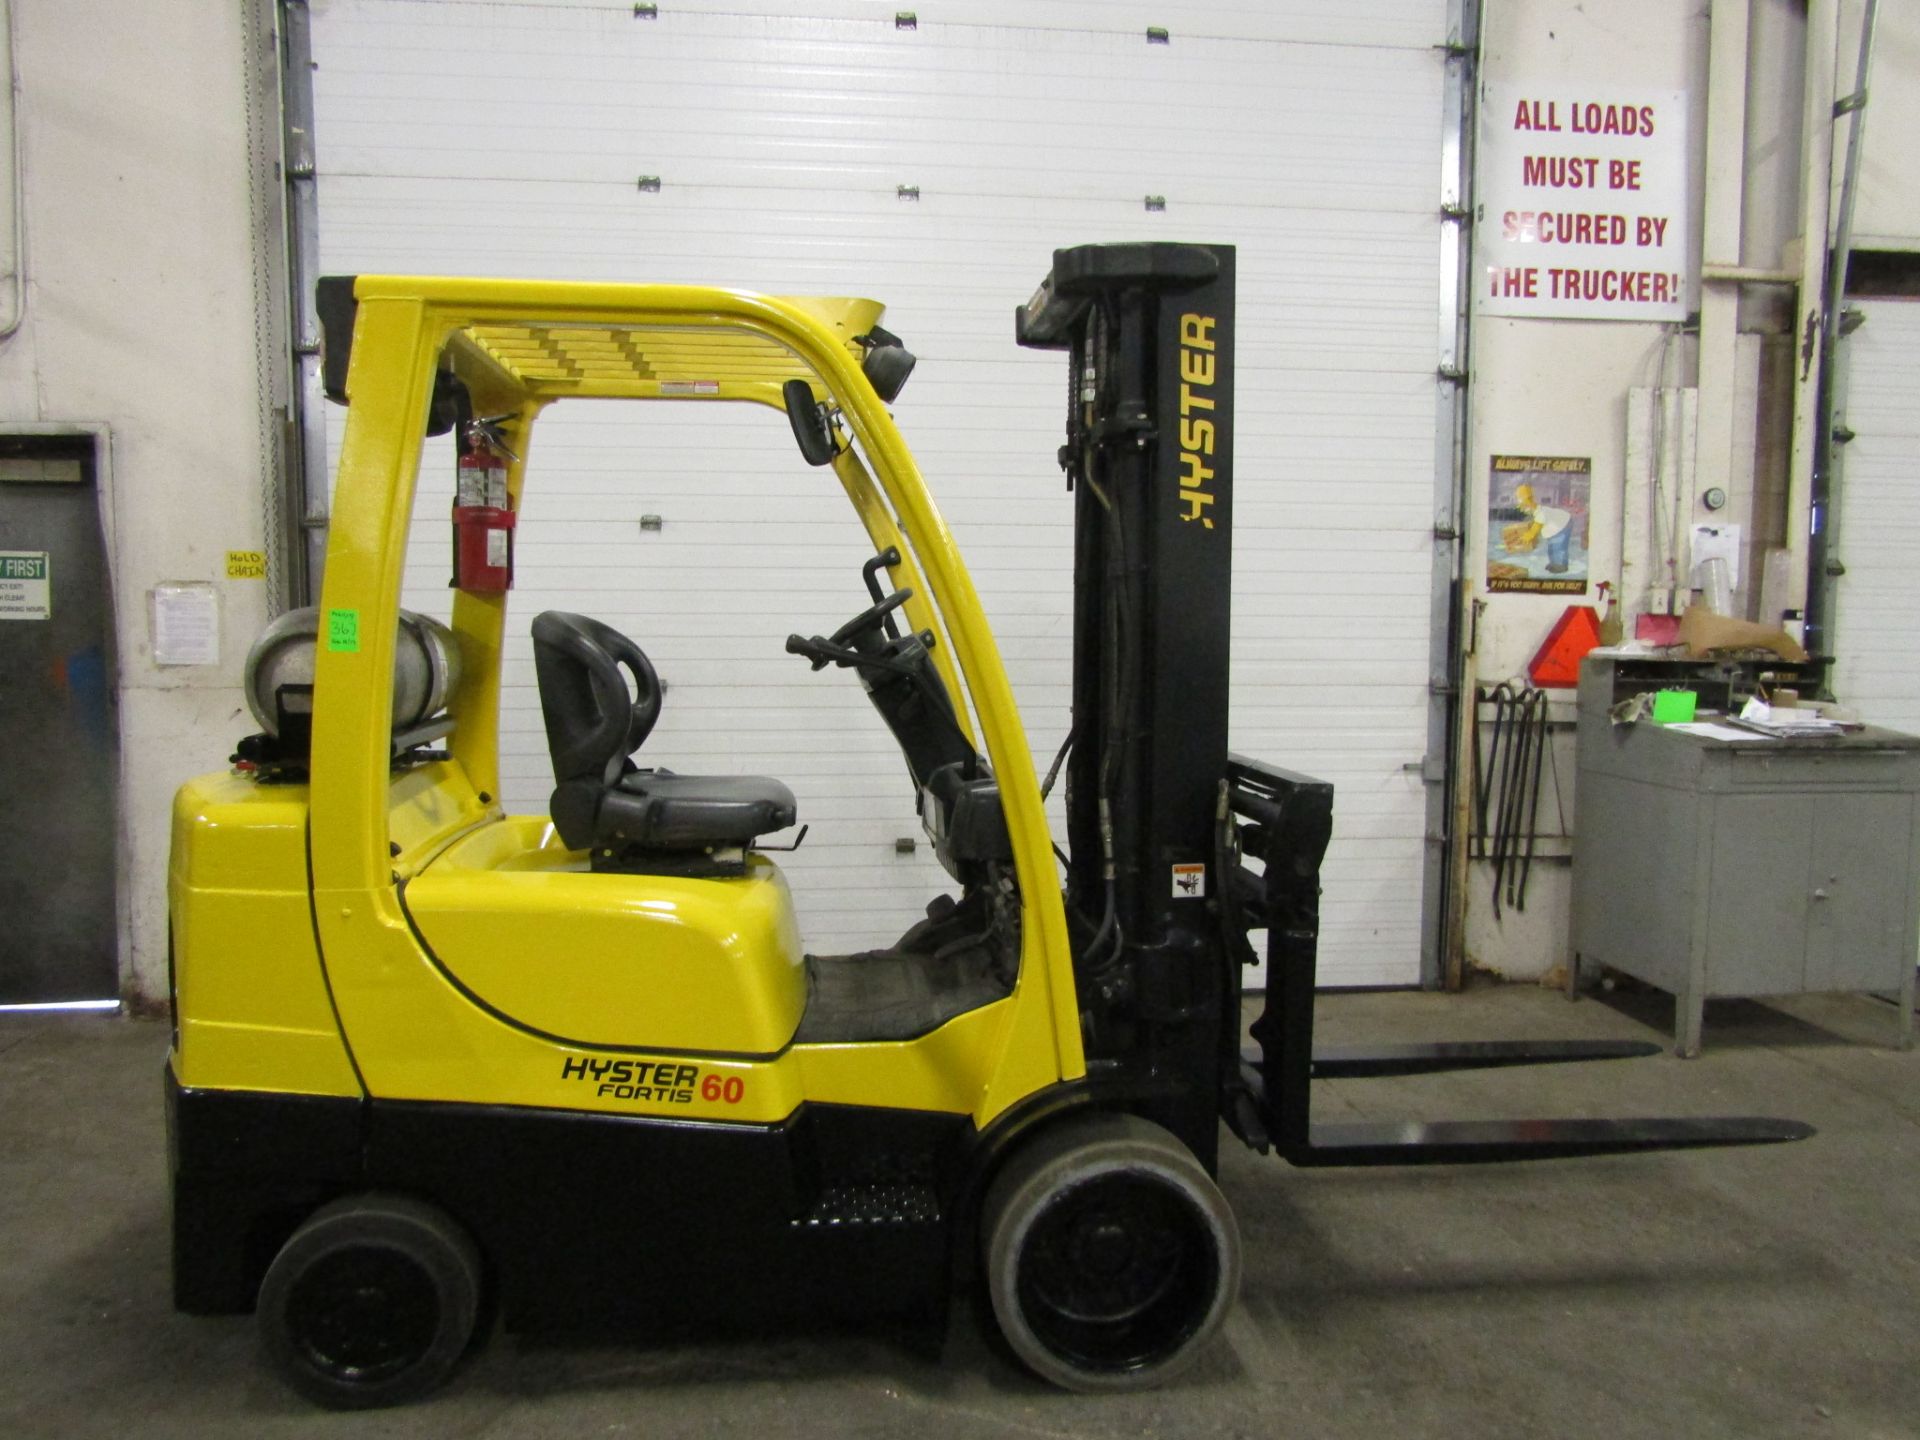 FREE CUSTOMS DOCS & 0 DUTY FEES - 2006 Hyster 6000lbs Capacity Forklift with 3-stage mast LPG